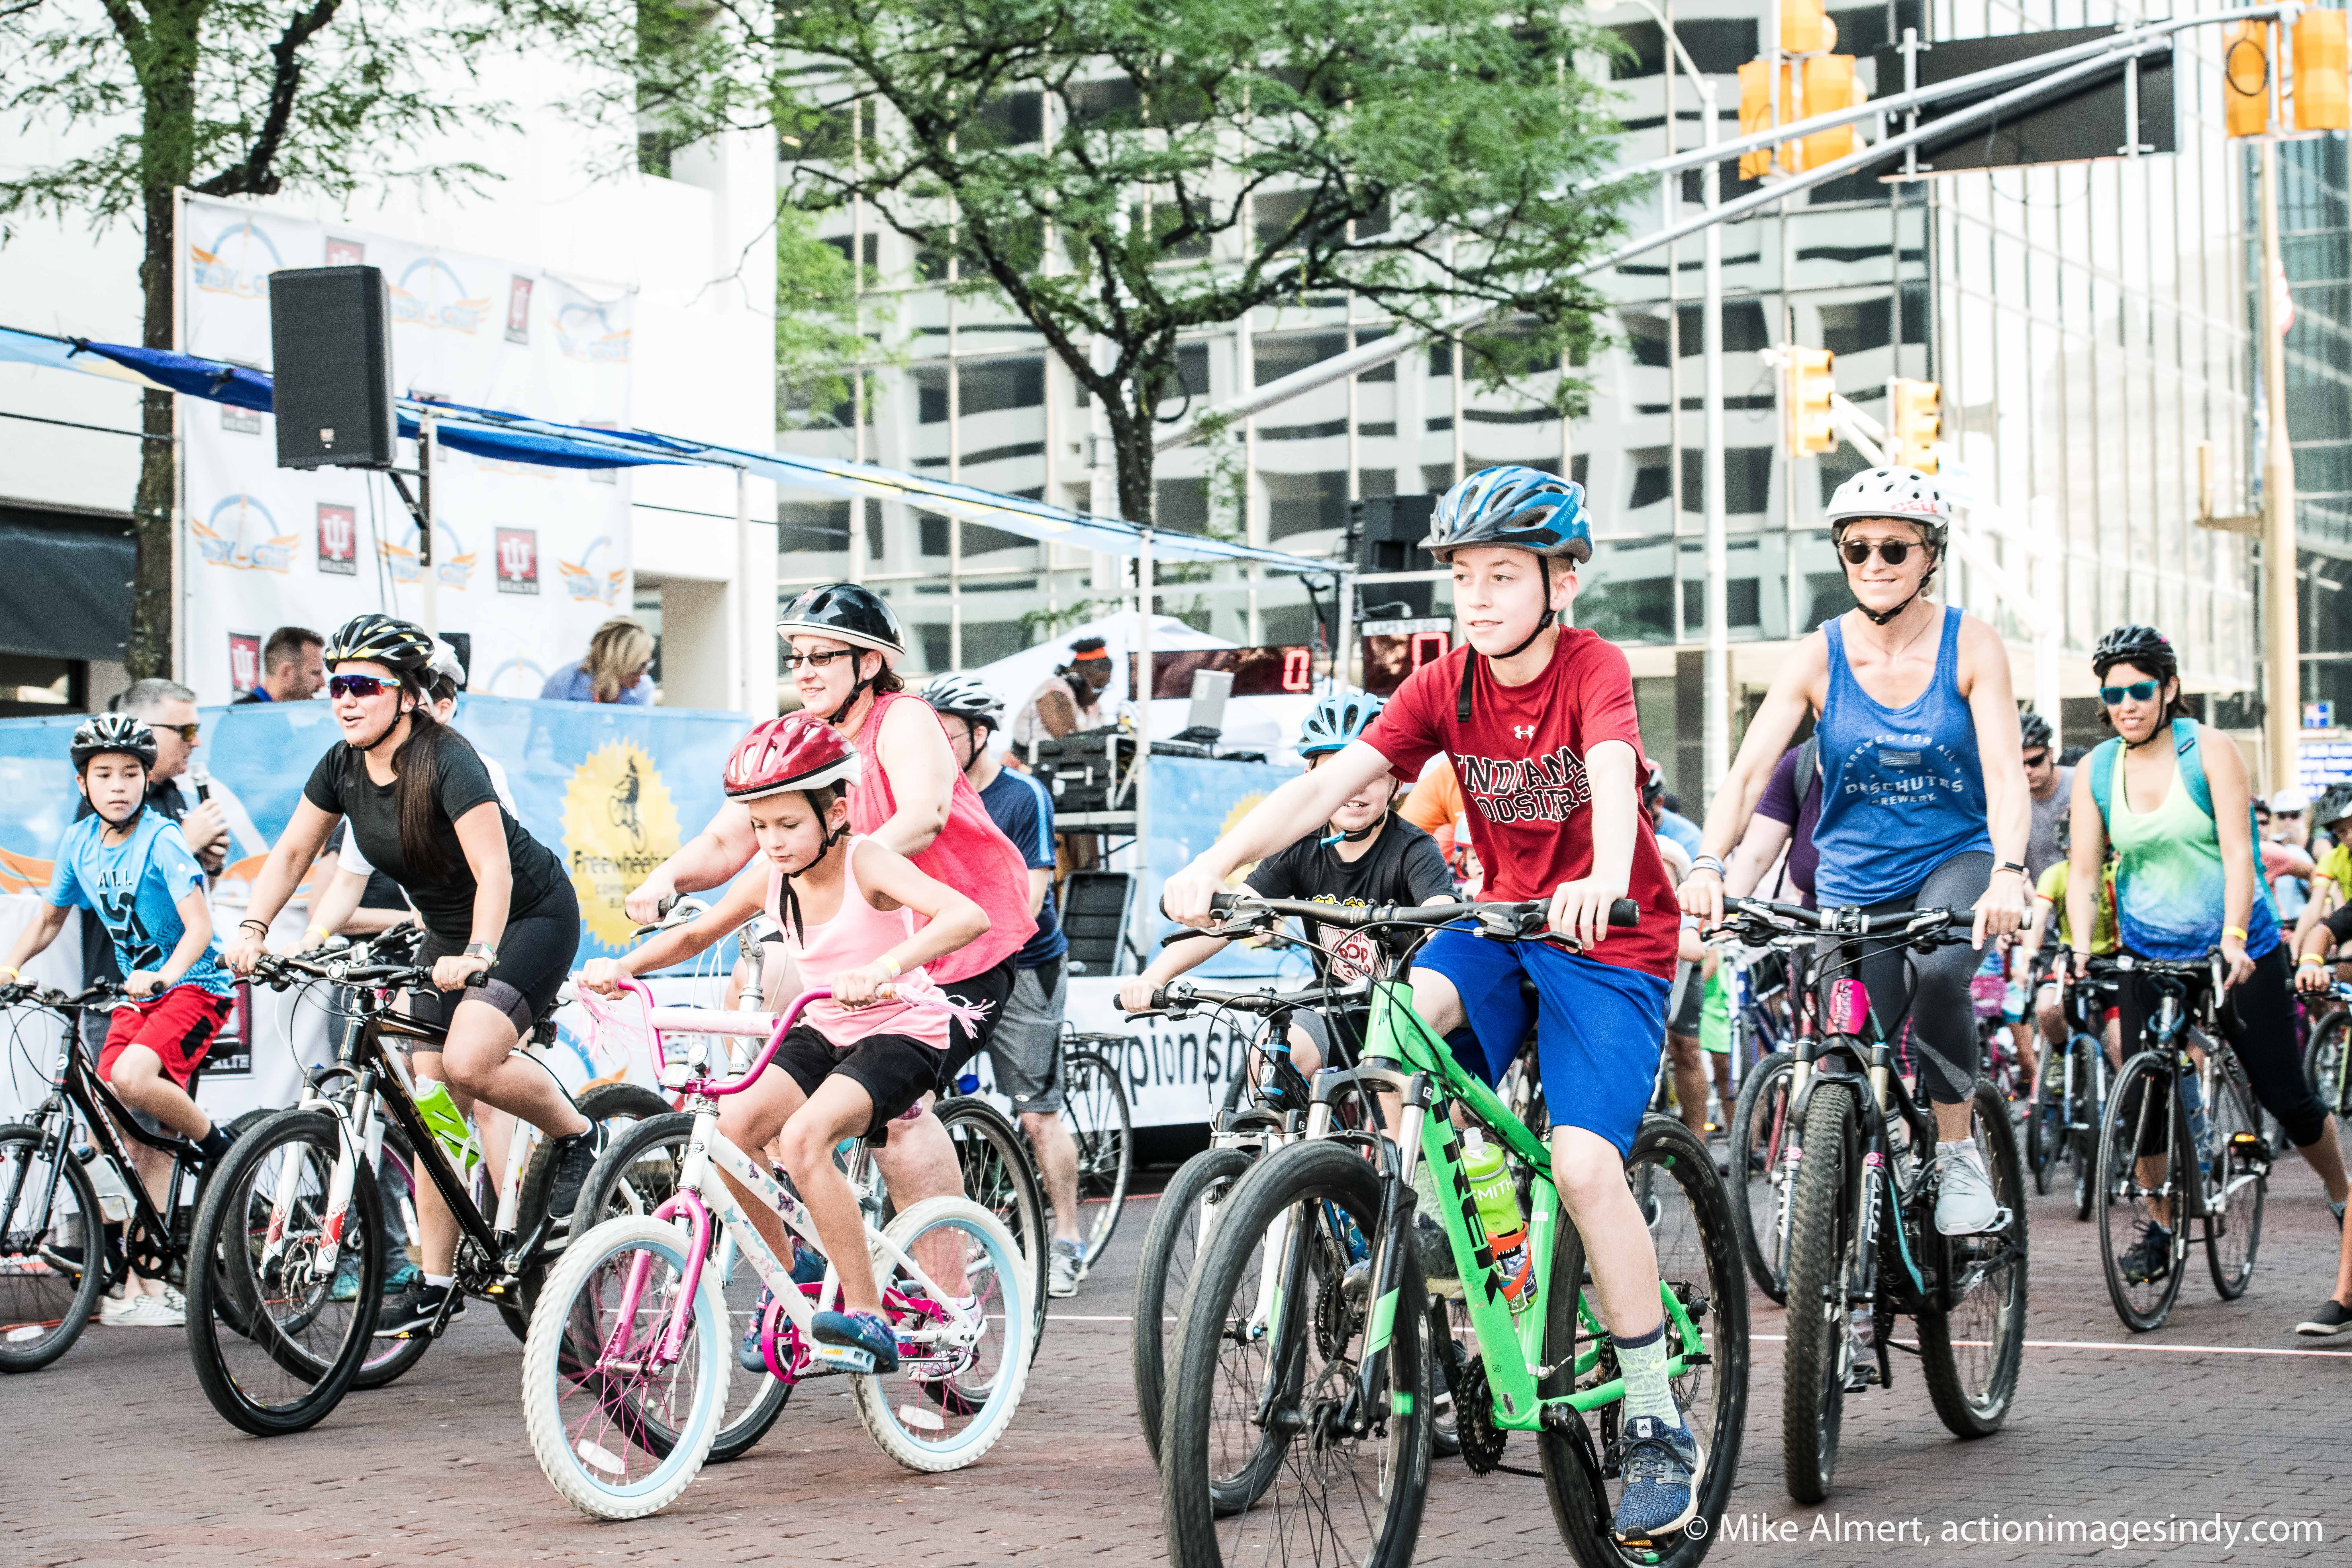 Free Family Fun at the IU Health Indy Crit Bicycle Festival Pedal, jump, climb and play all while learning how to stay happy, healthy and safe this summer!  